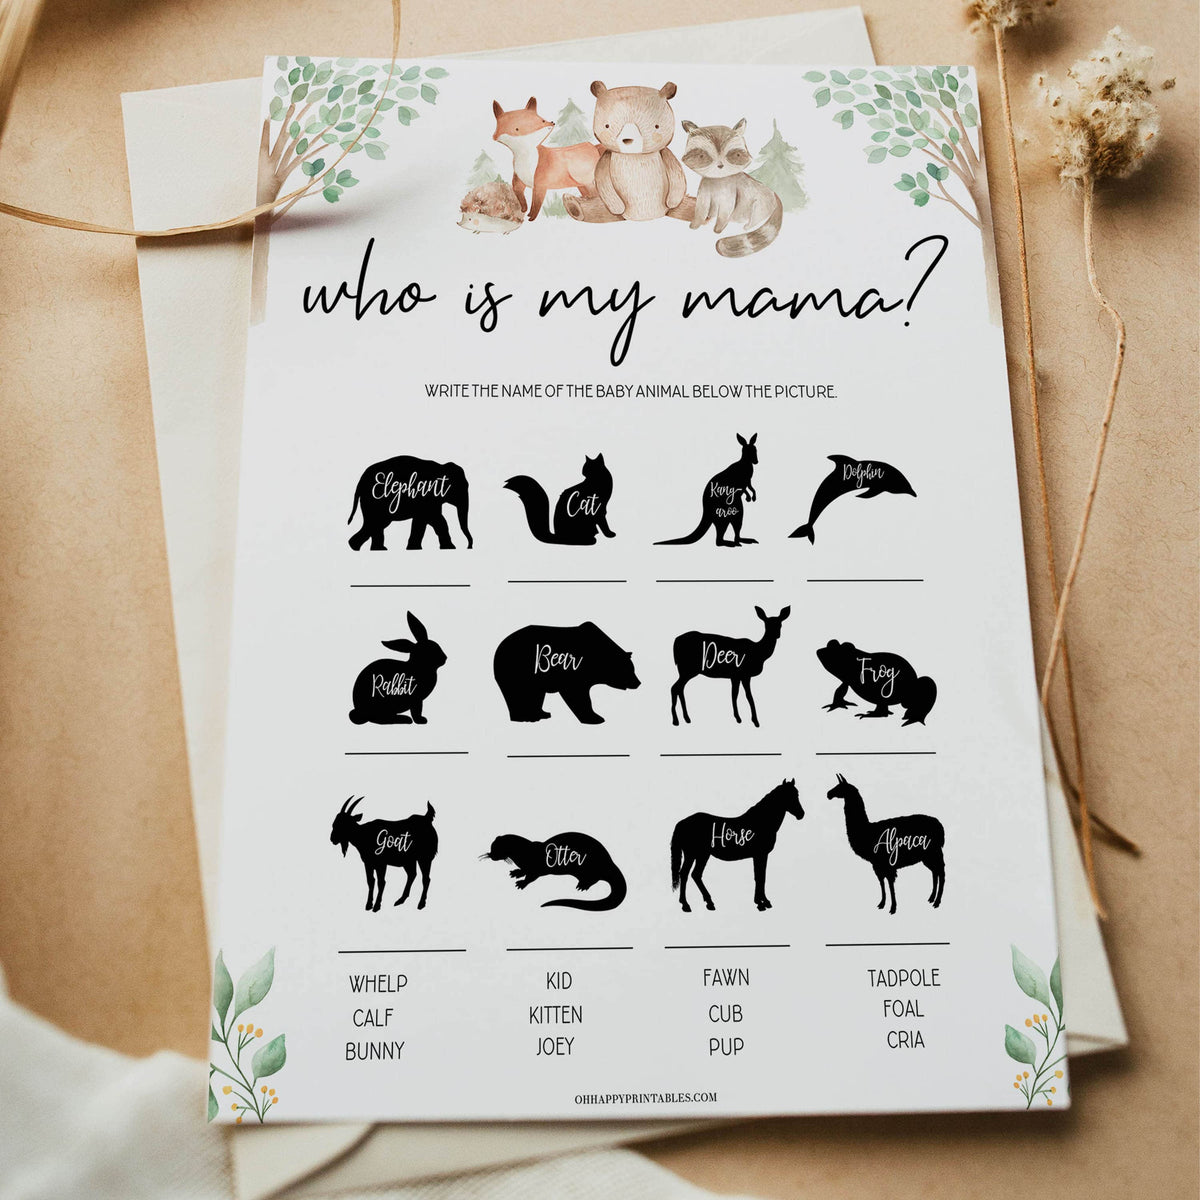 who is my mama baby shower game, Printable baby shower games, woodland animals baby games, baby shower games, fun baby shower ideas, top baby shower ideas, woodland baby shower, baby shower games, fun woodland animals baby shower ideas